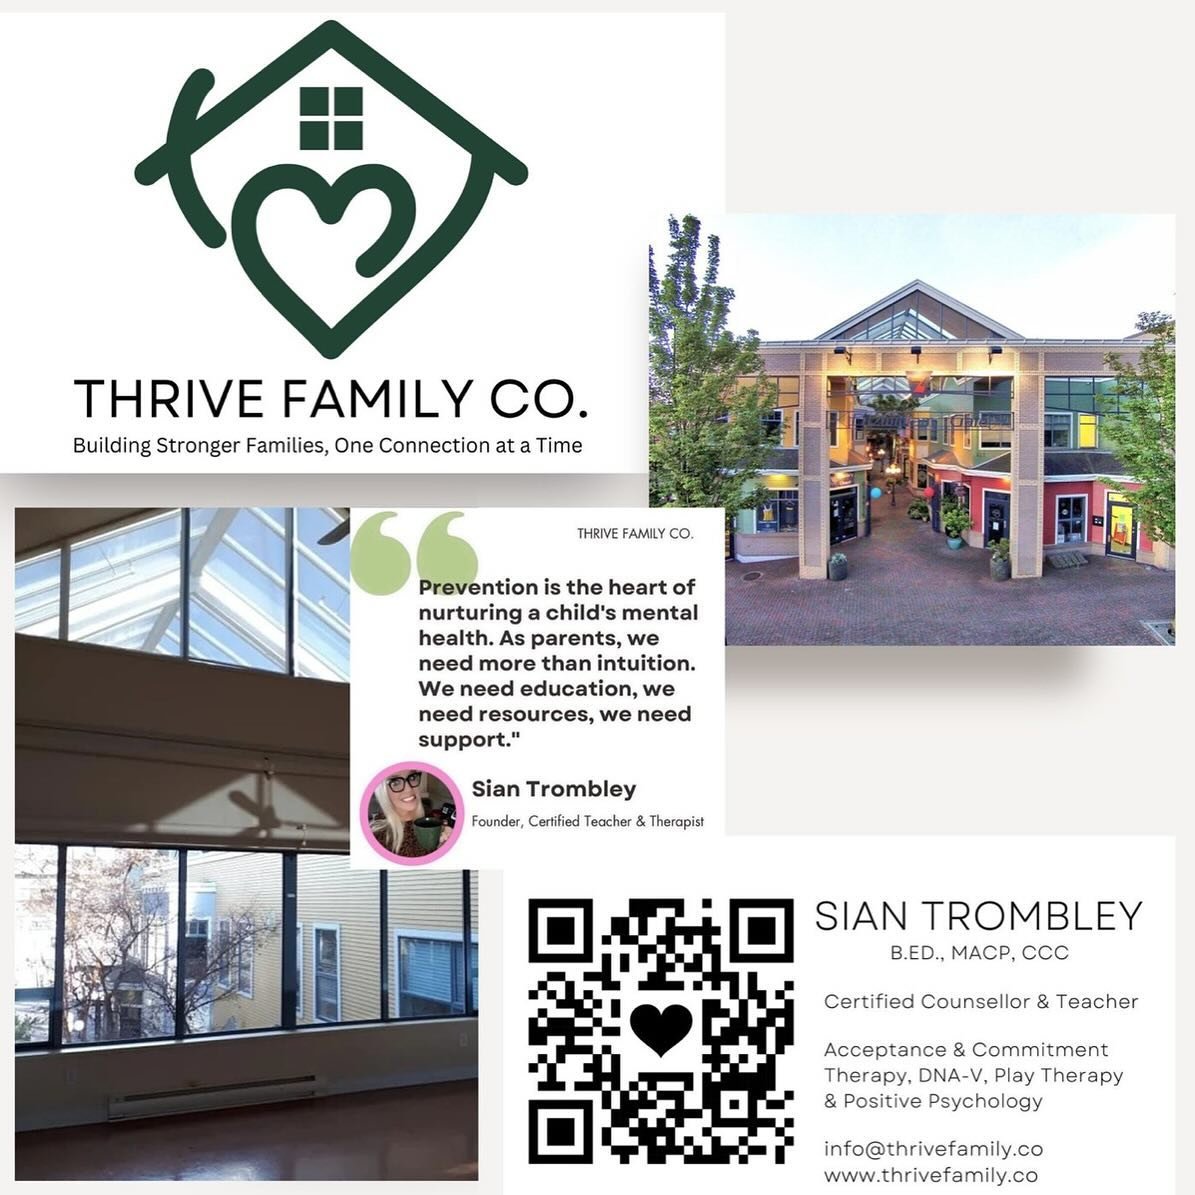 THRIVE FAMILY CO. ❤️@thrivefamily.co www.thrivefamily.co 🌱 #kidsmentalhealth #mentalhealth #mentalhealthawareness #childrensmentalhealth #parenting #kidsmentalhealthmatters #kids #mentalhealthmatters #parentingtips #wellbeing #mindfulness #mindfulpa